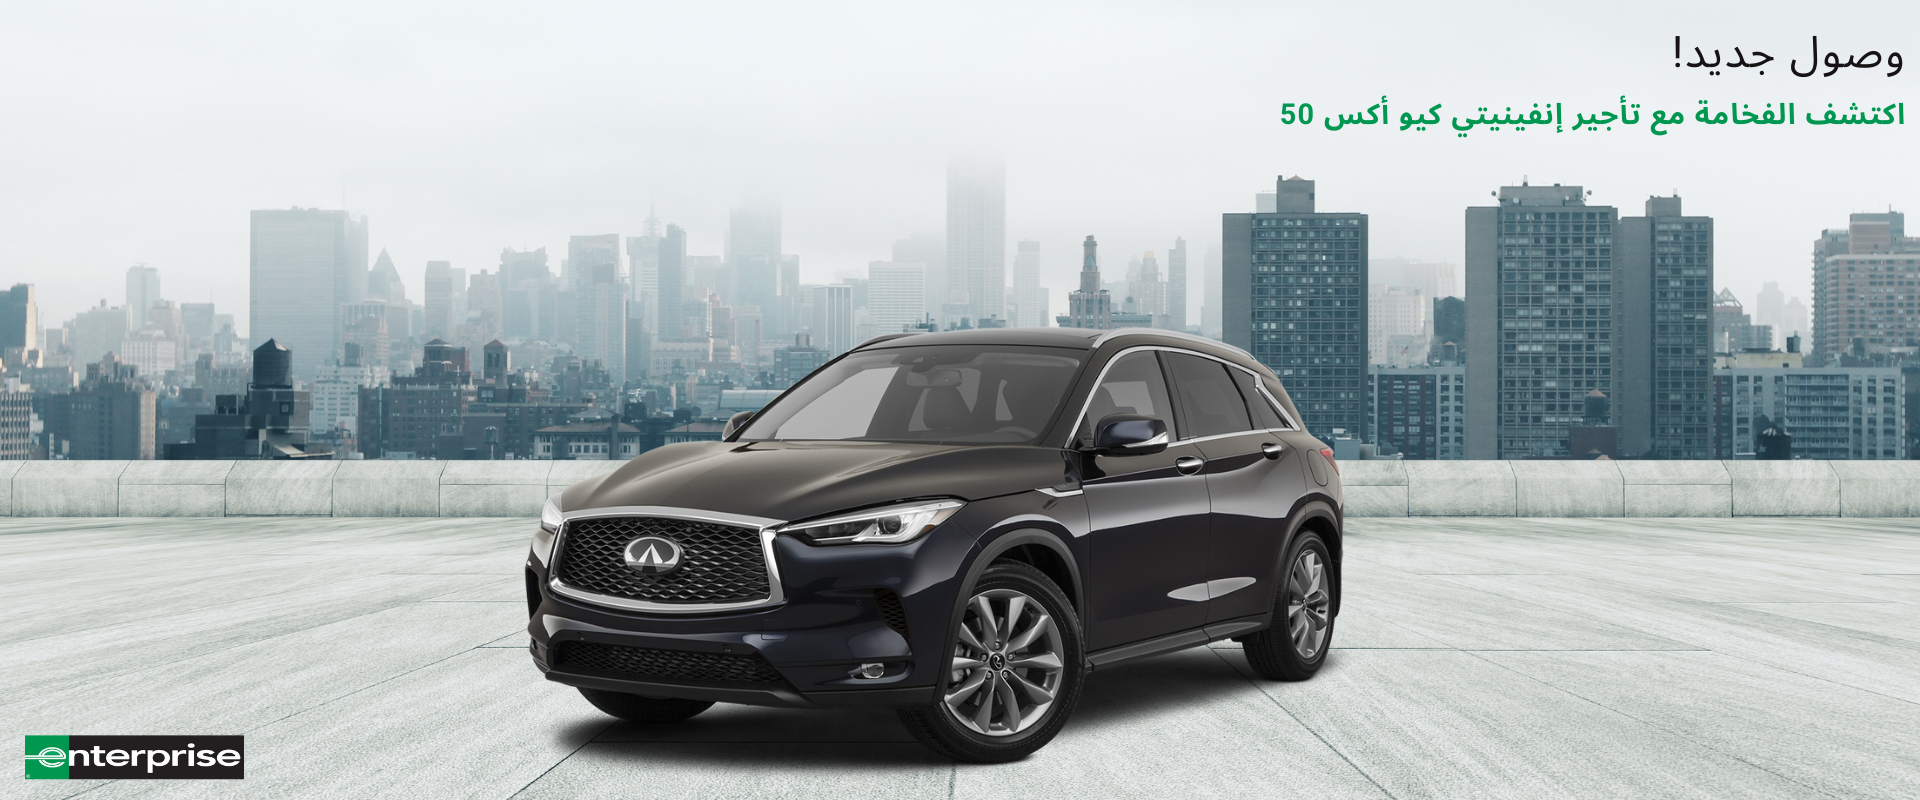 Promotional offer showcasing affordable car rental options QX50 in Doha.